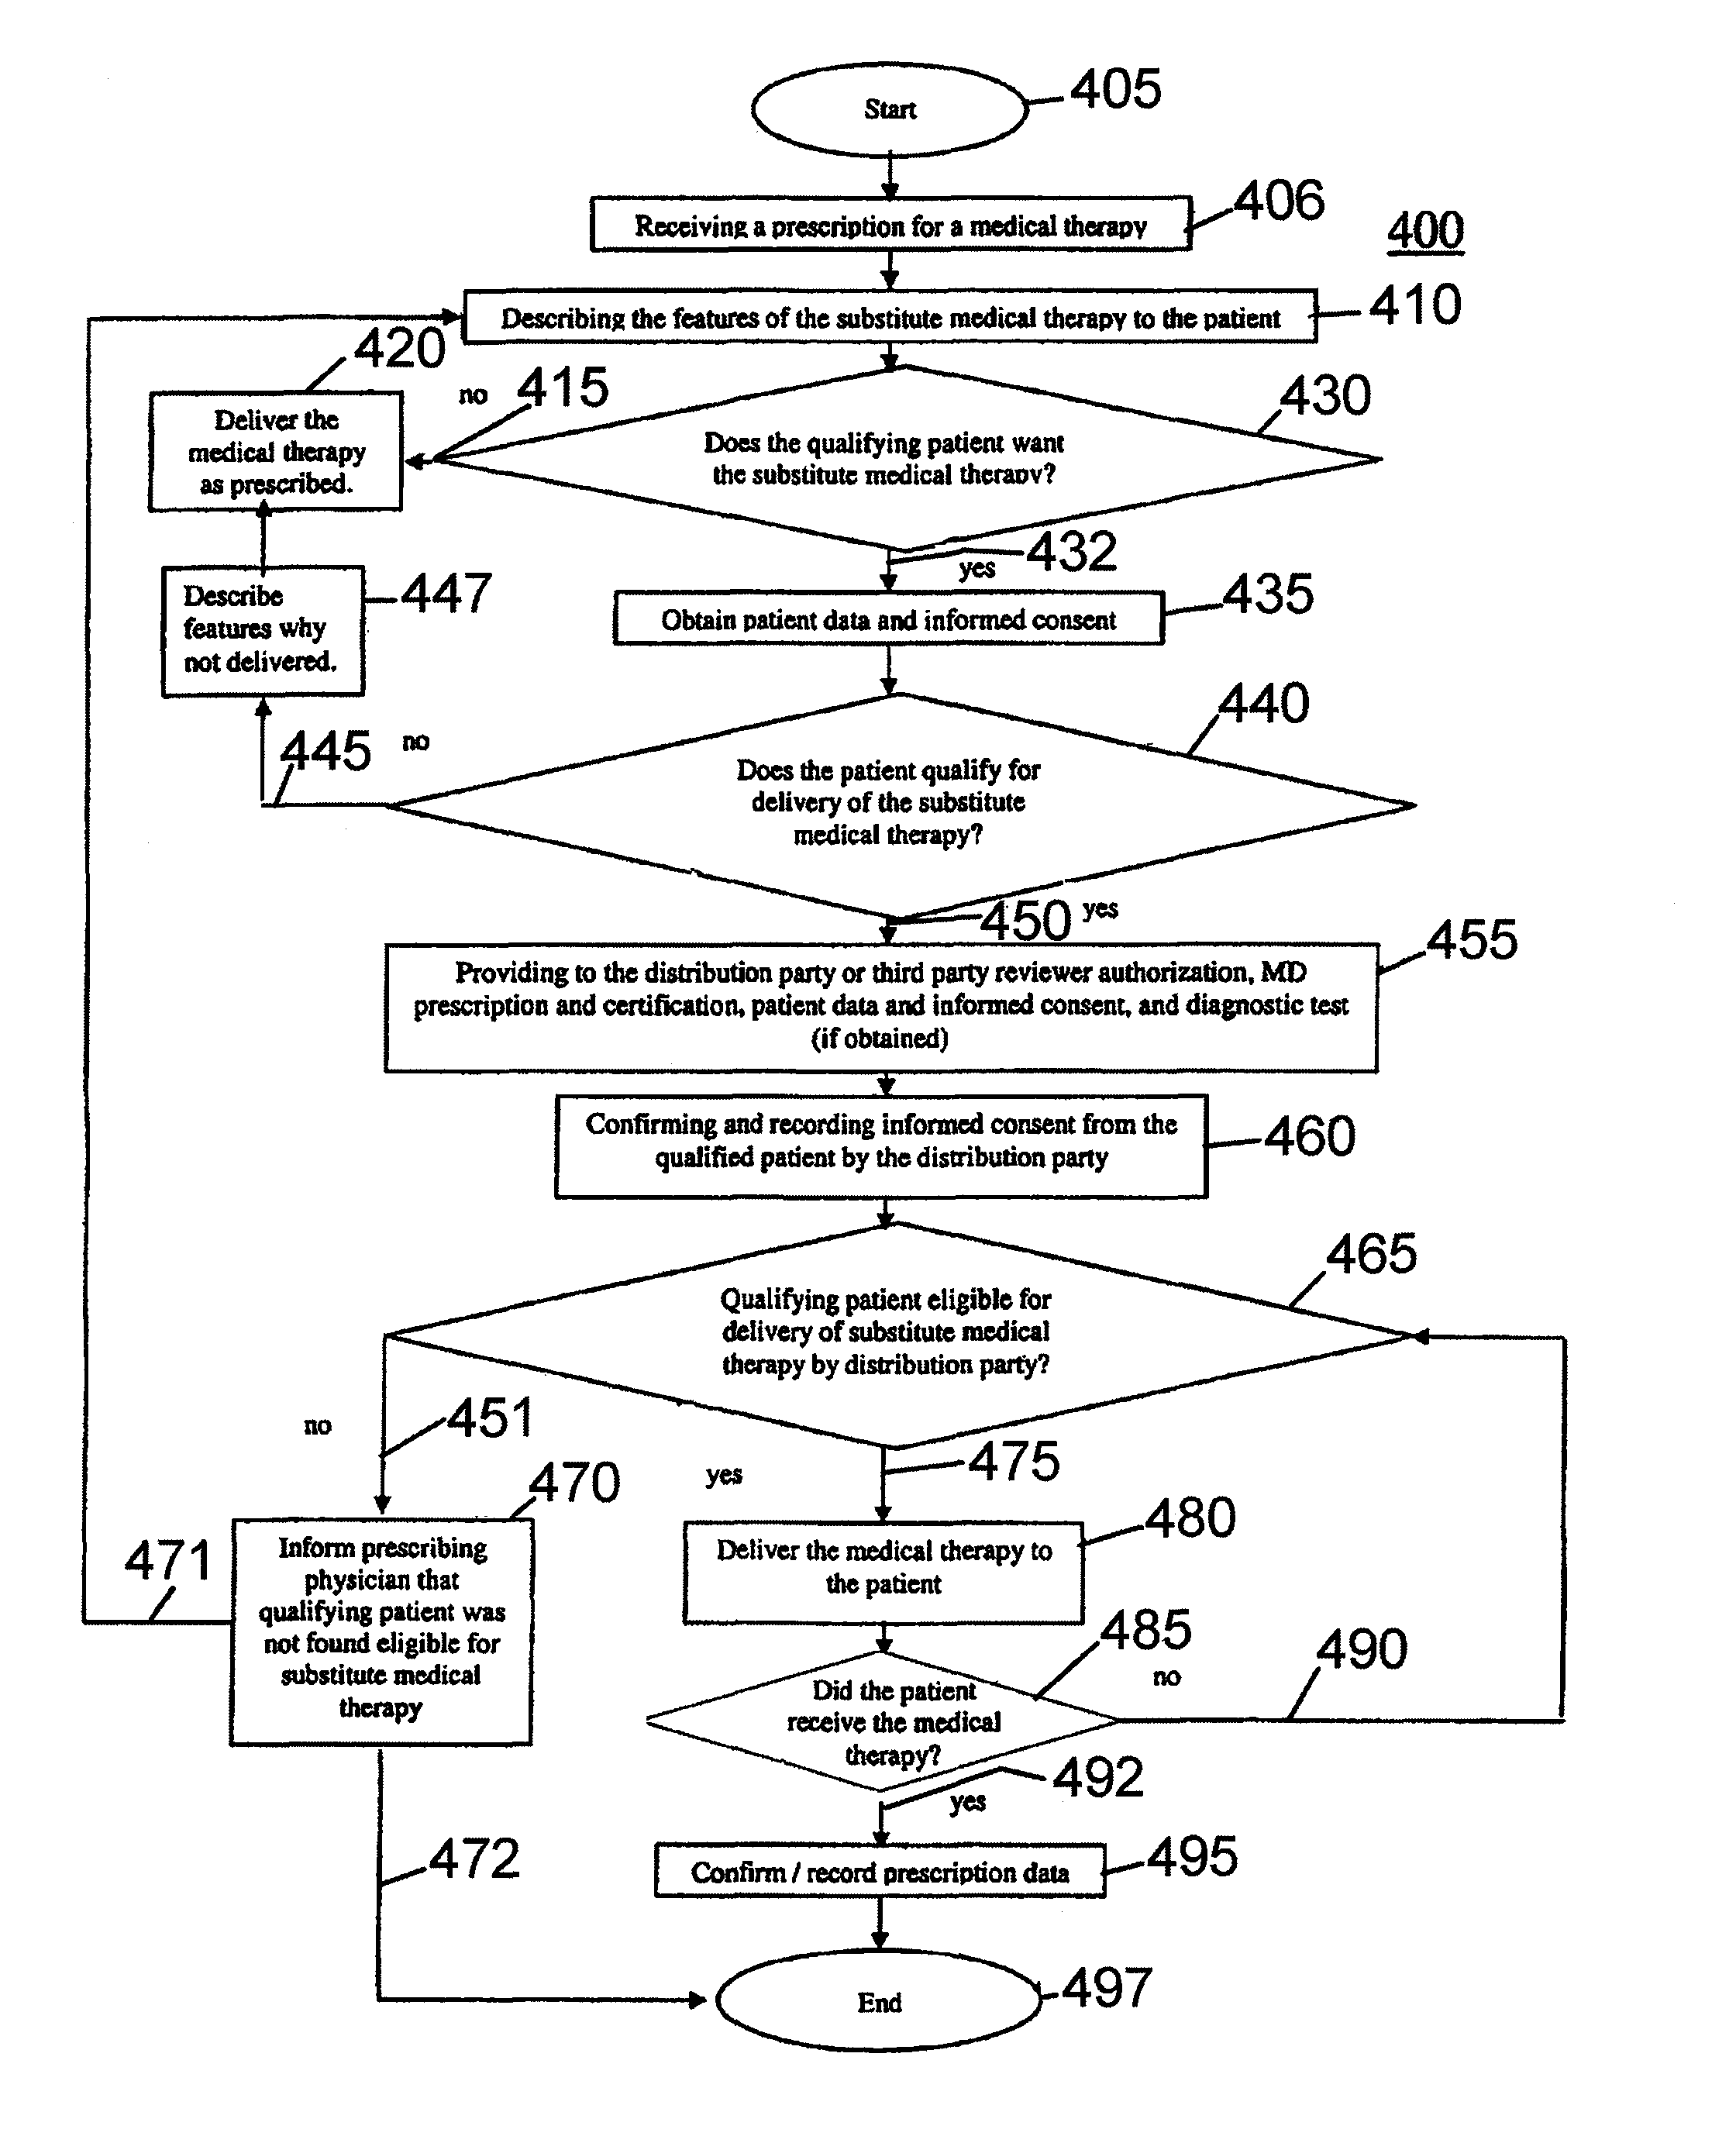 Method and system for delivering substitute medical therapies with restricted access